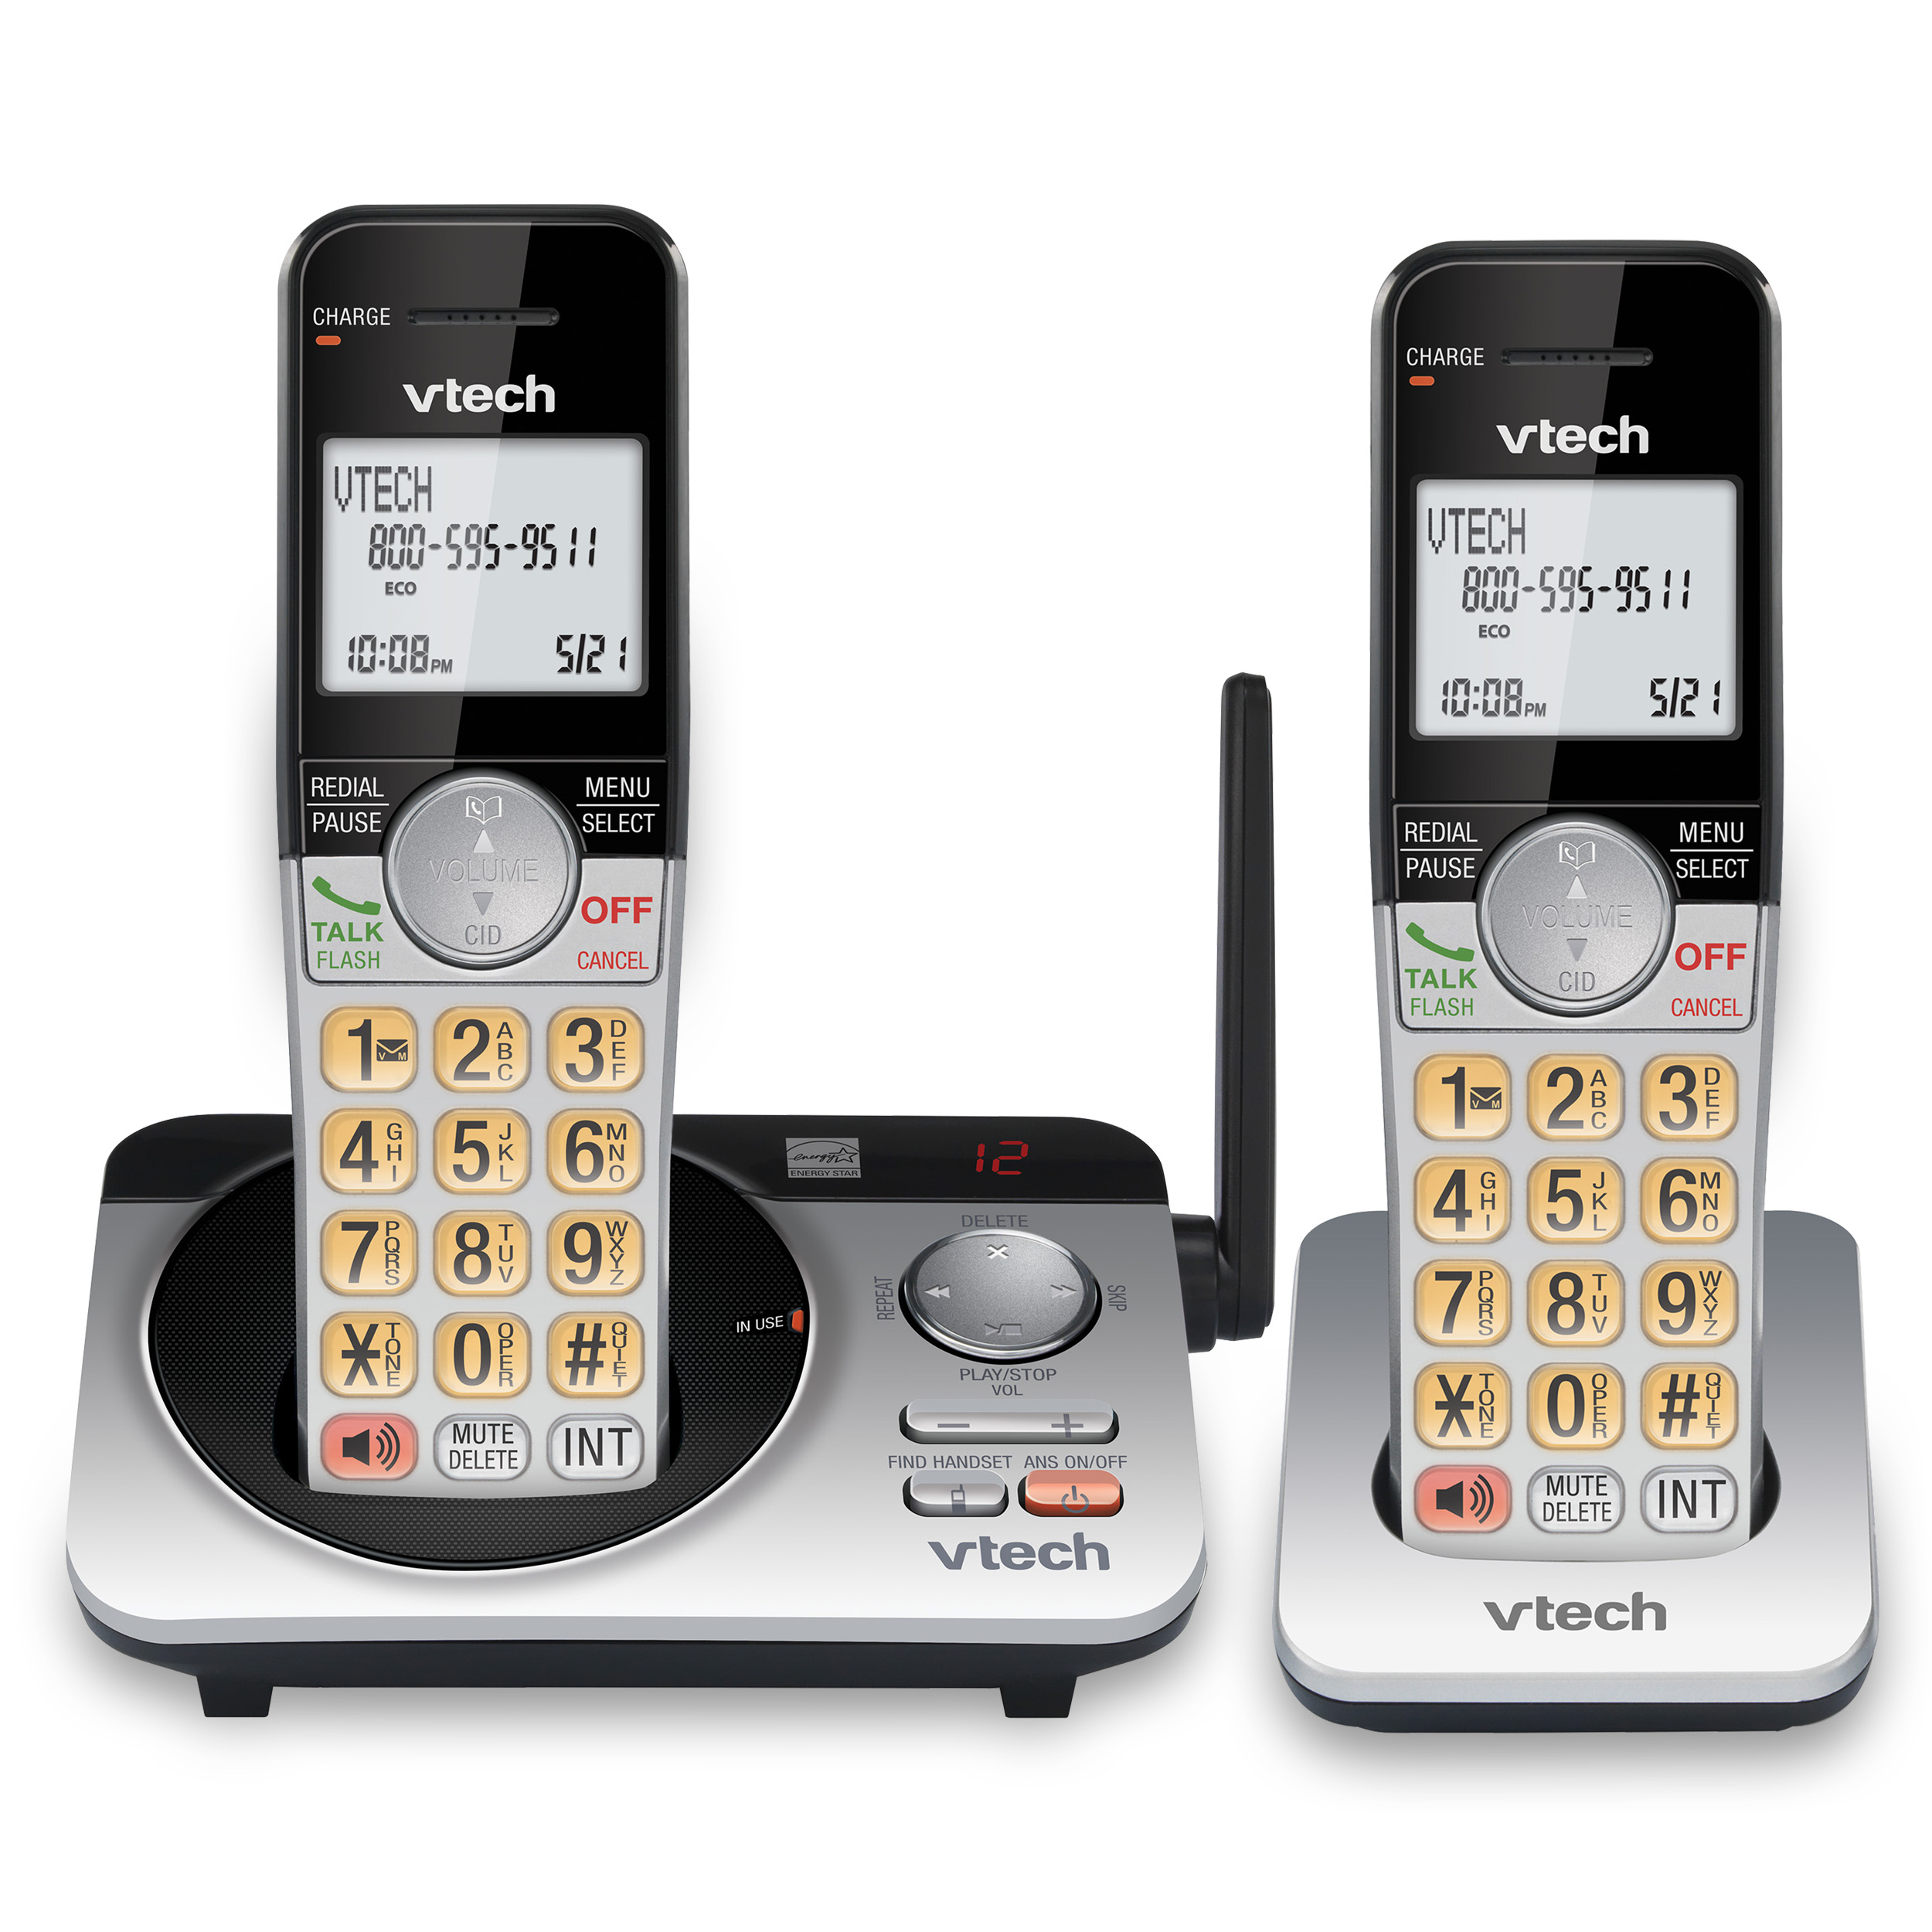 VTech CS5229-2 2 Handset Extended Range DECT 6.0 Cordless Phone with Answering System (Silver/Black) - image 1 of 18